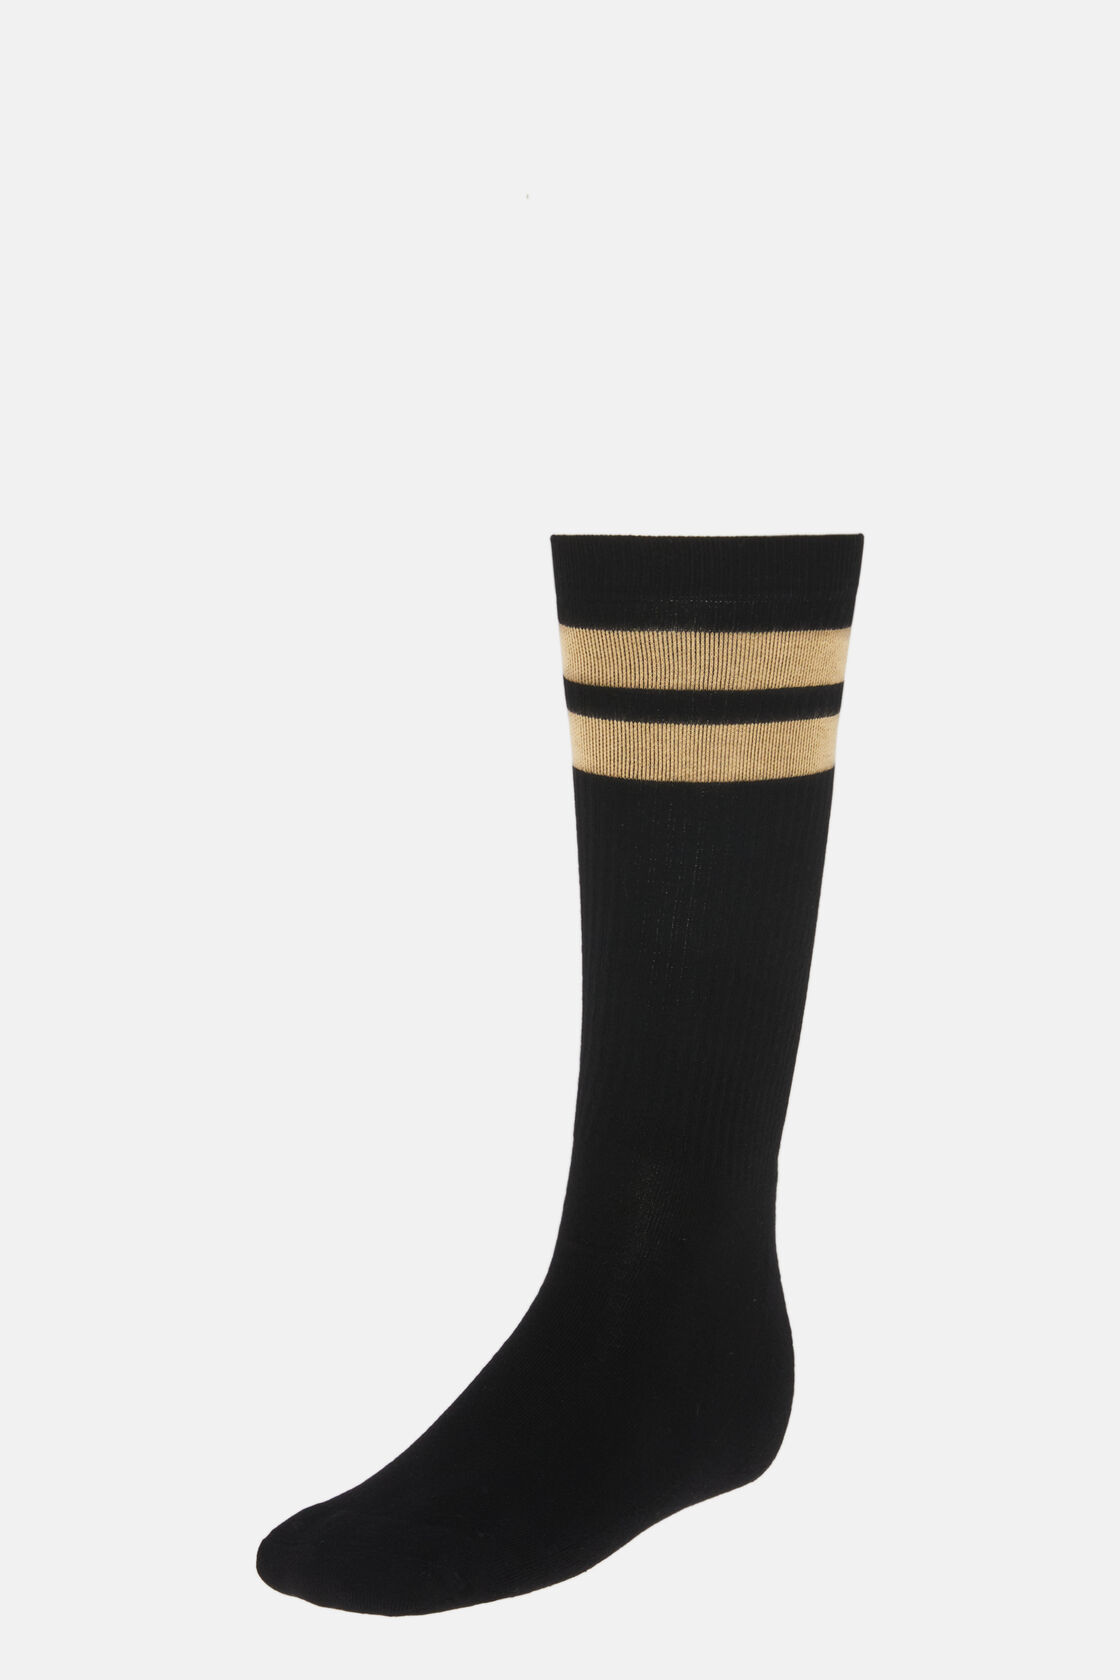 Double Striped Socks in a Cotton Blend, Black, hi-res